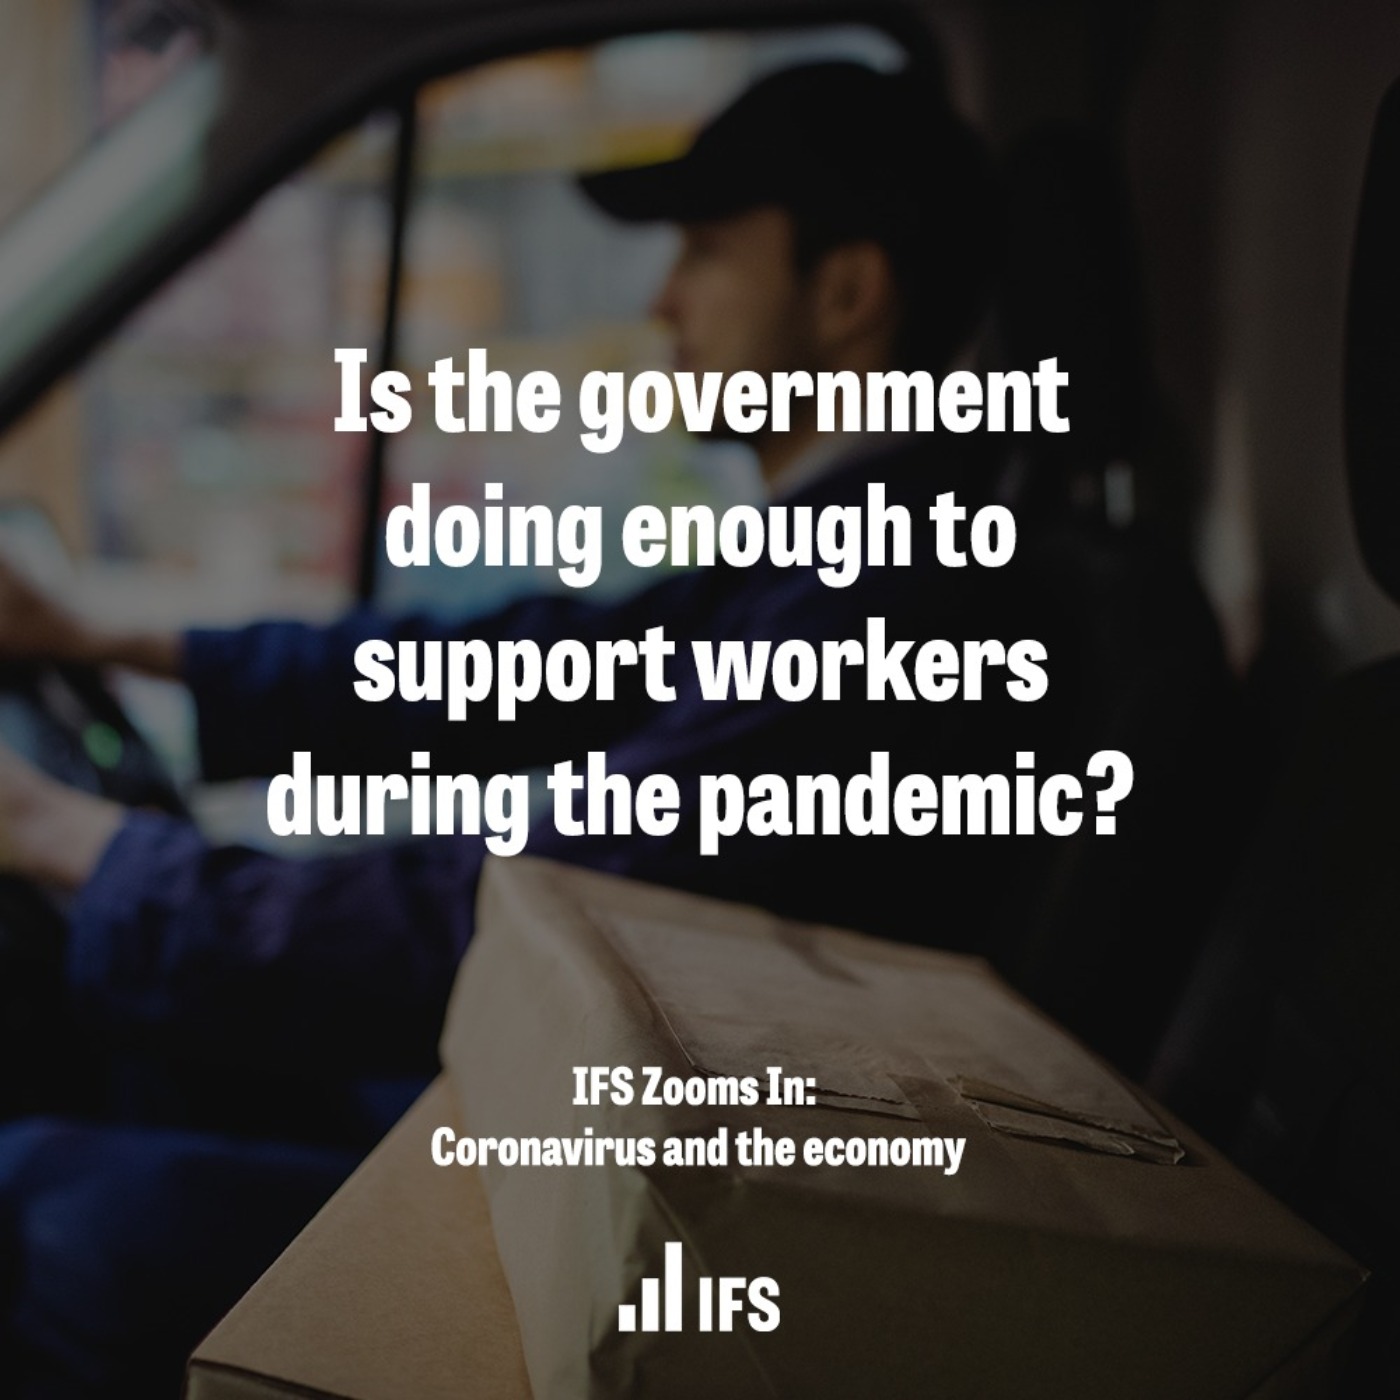 Is the government doing enough to support workers during the pandemic?